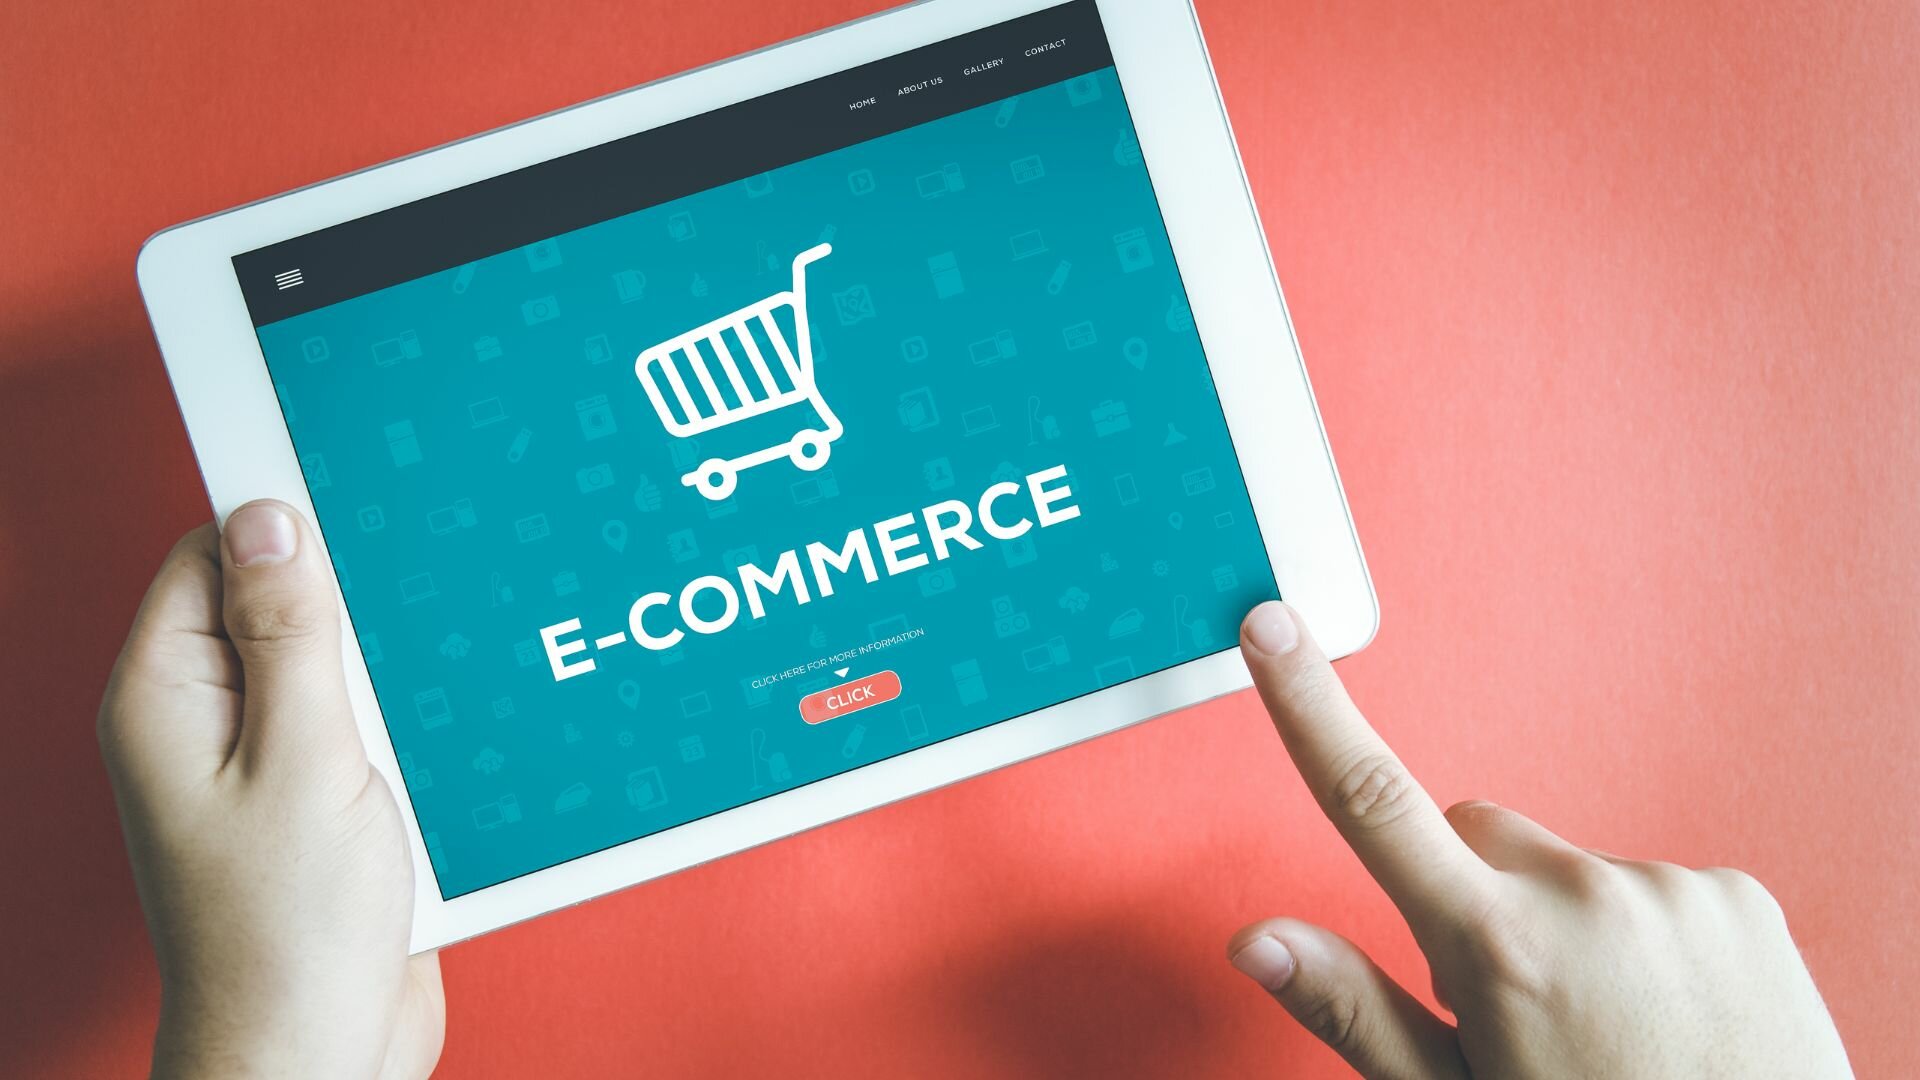 How to Grow eCommerce Business and Increase Sales